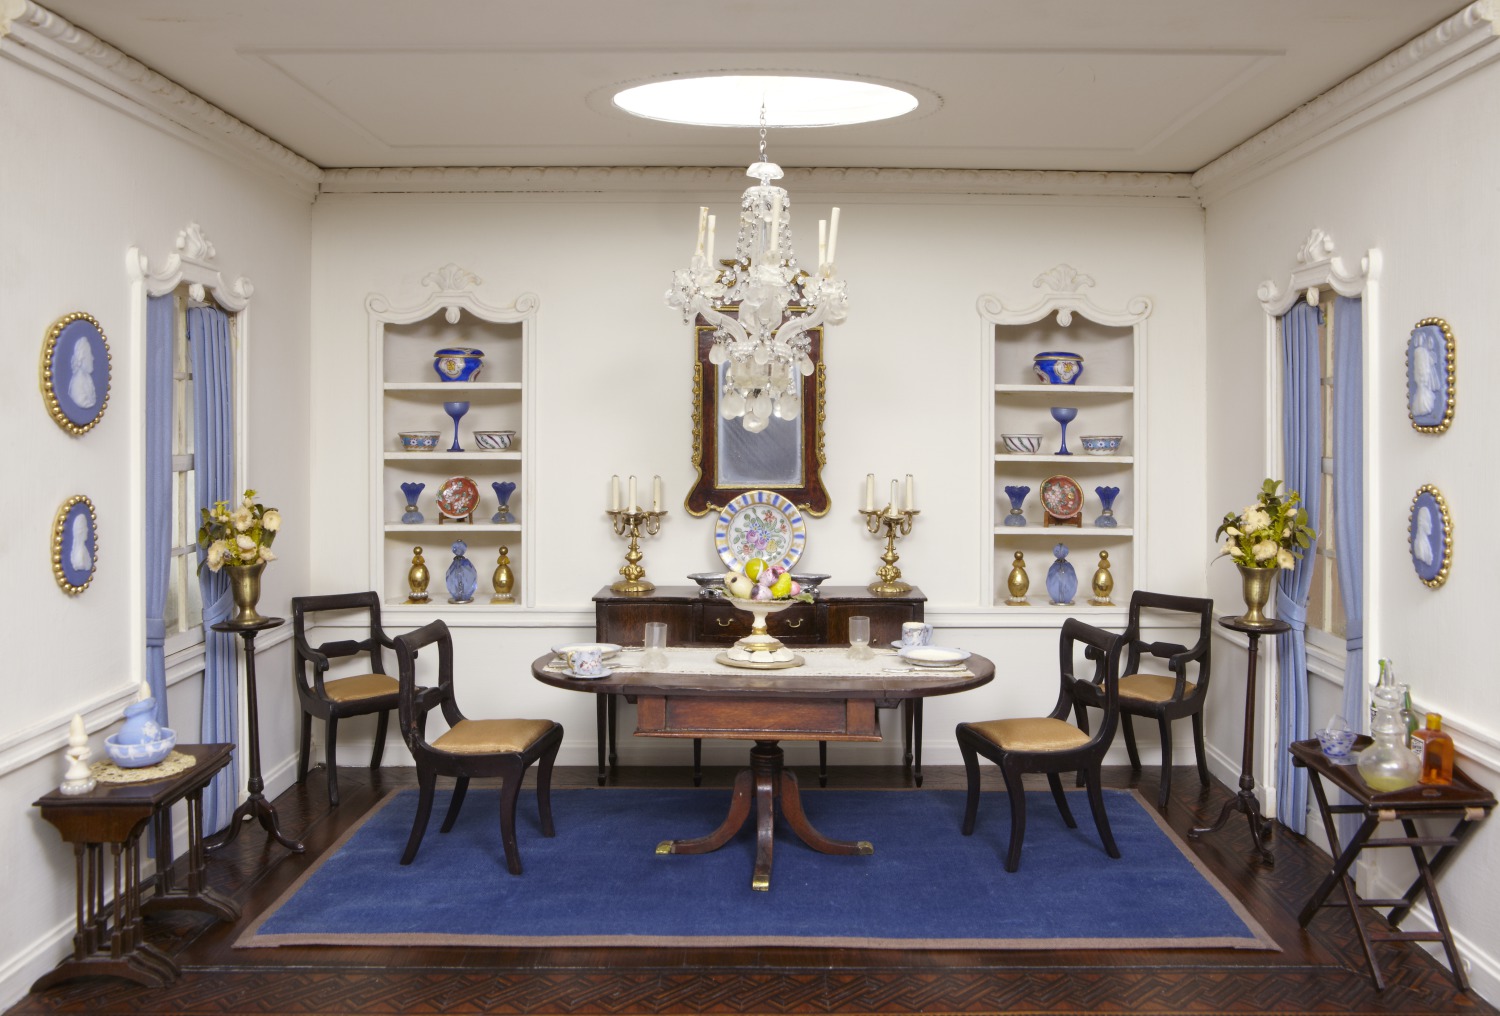 Narcissa Niblack Thorne, American Federal Dining Room, c. 1800, 1940-1960, mixed media, Gift of Mr. and Mrs. Niblack Thorne